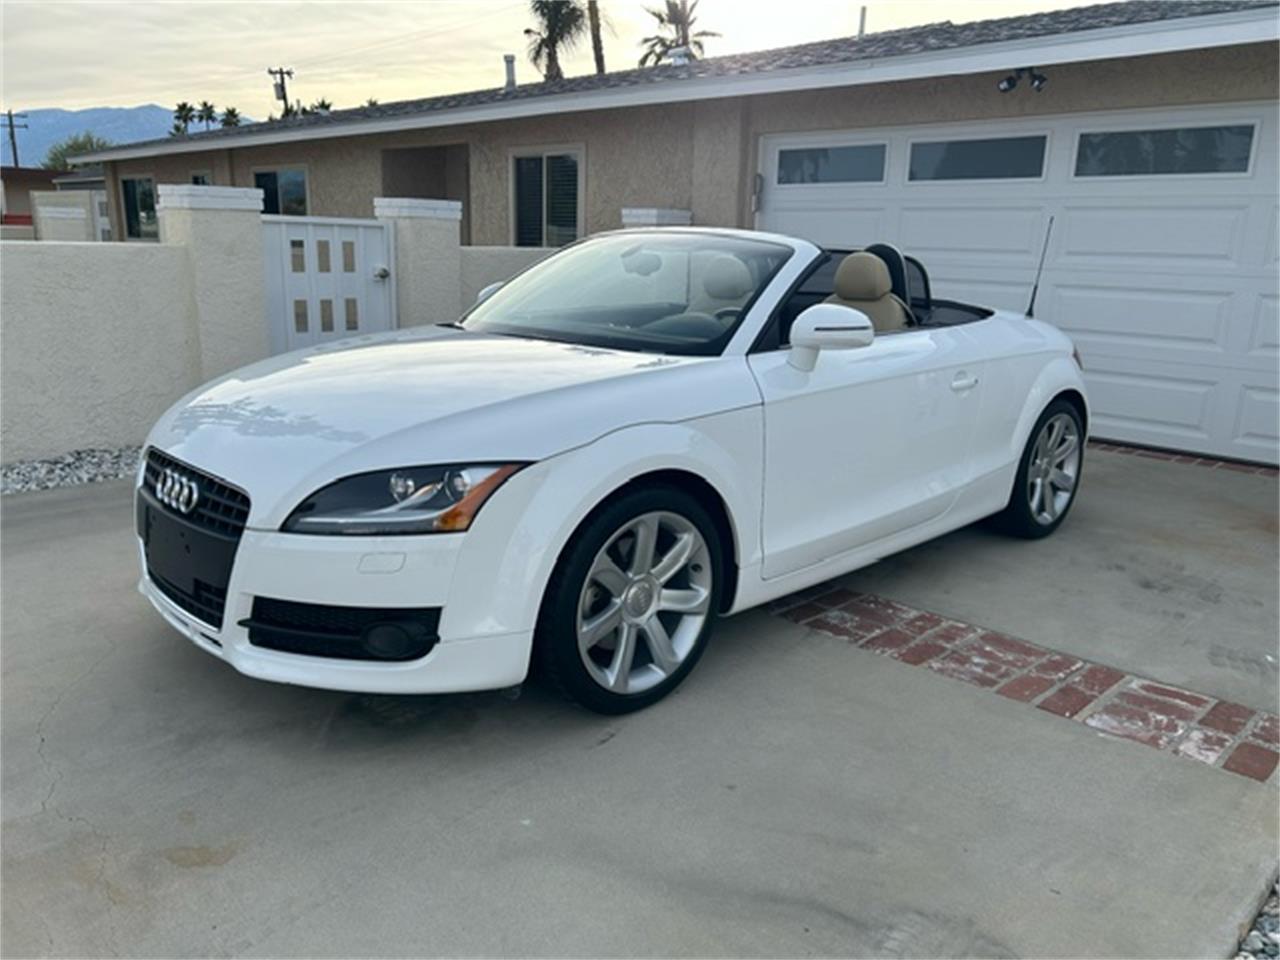 For Sale at Auction: 2008 Audi TT in Palm Springs, California for sale in Palm Springs, CA